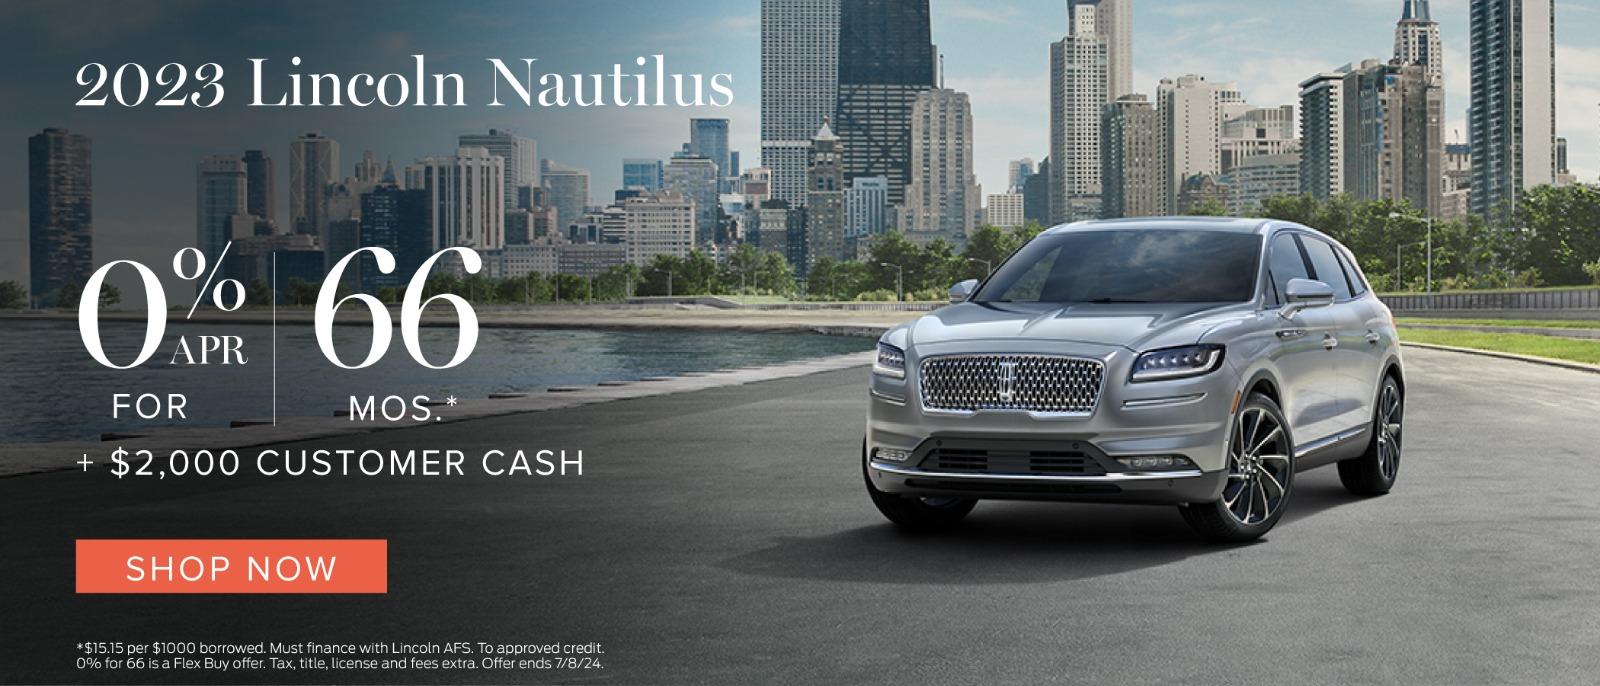 2023 Lincoln Nautilus 0%APR for 66months + $2,000 Customer Cash